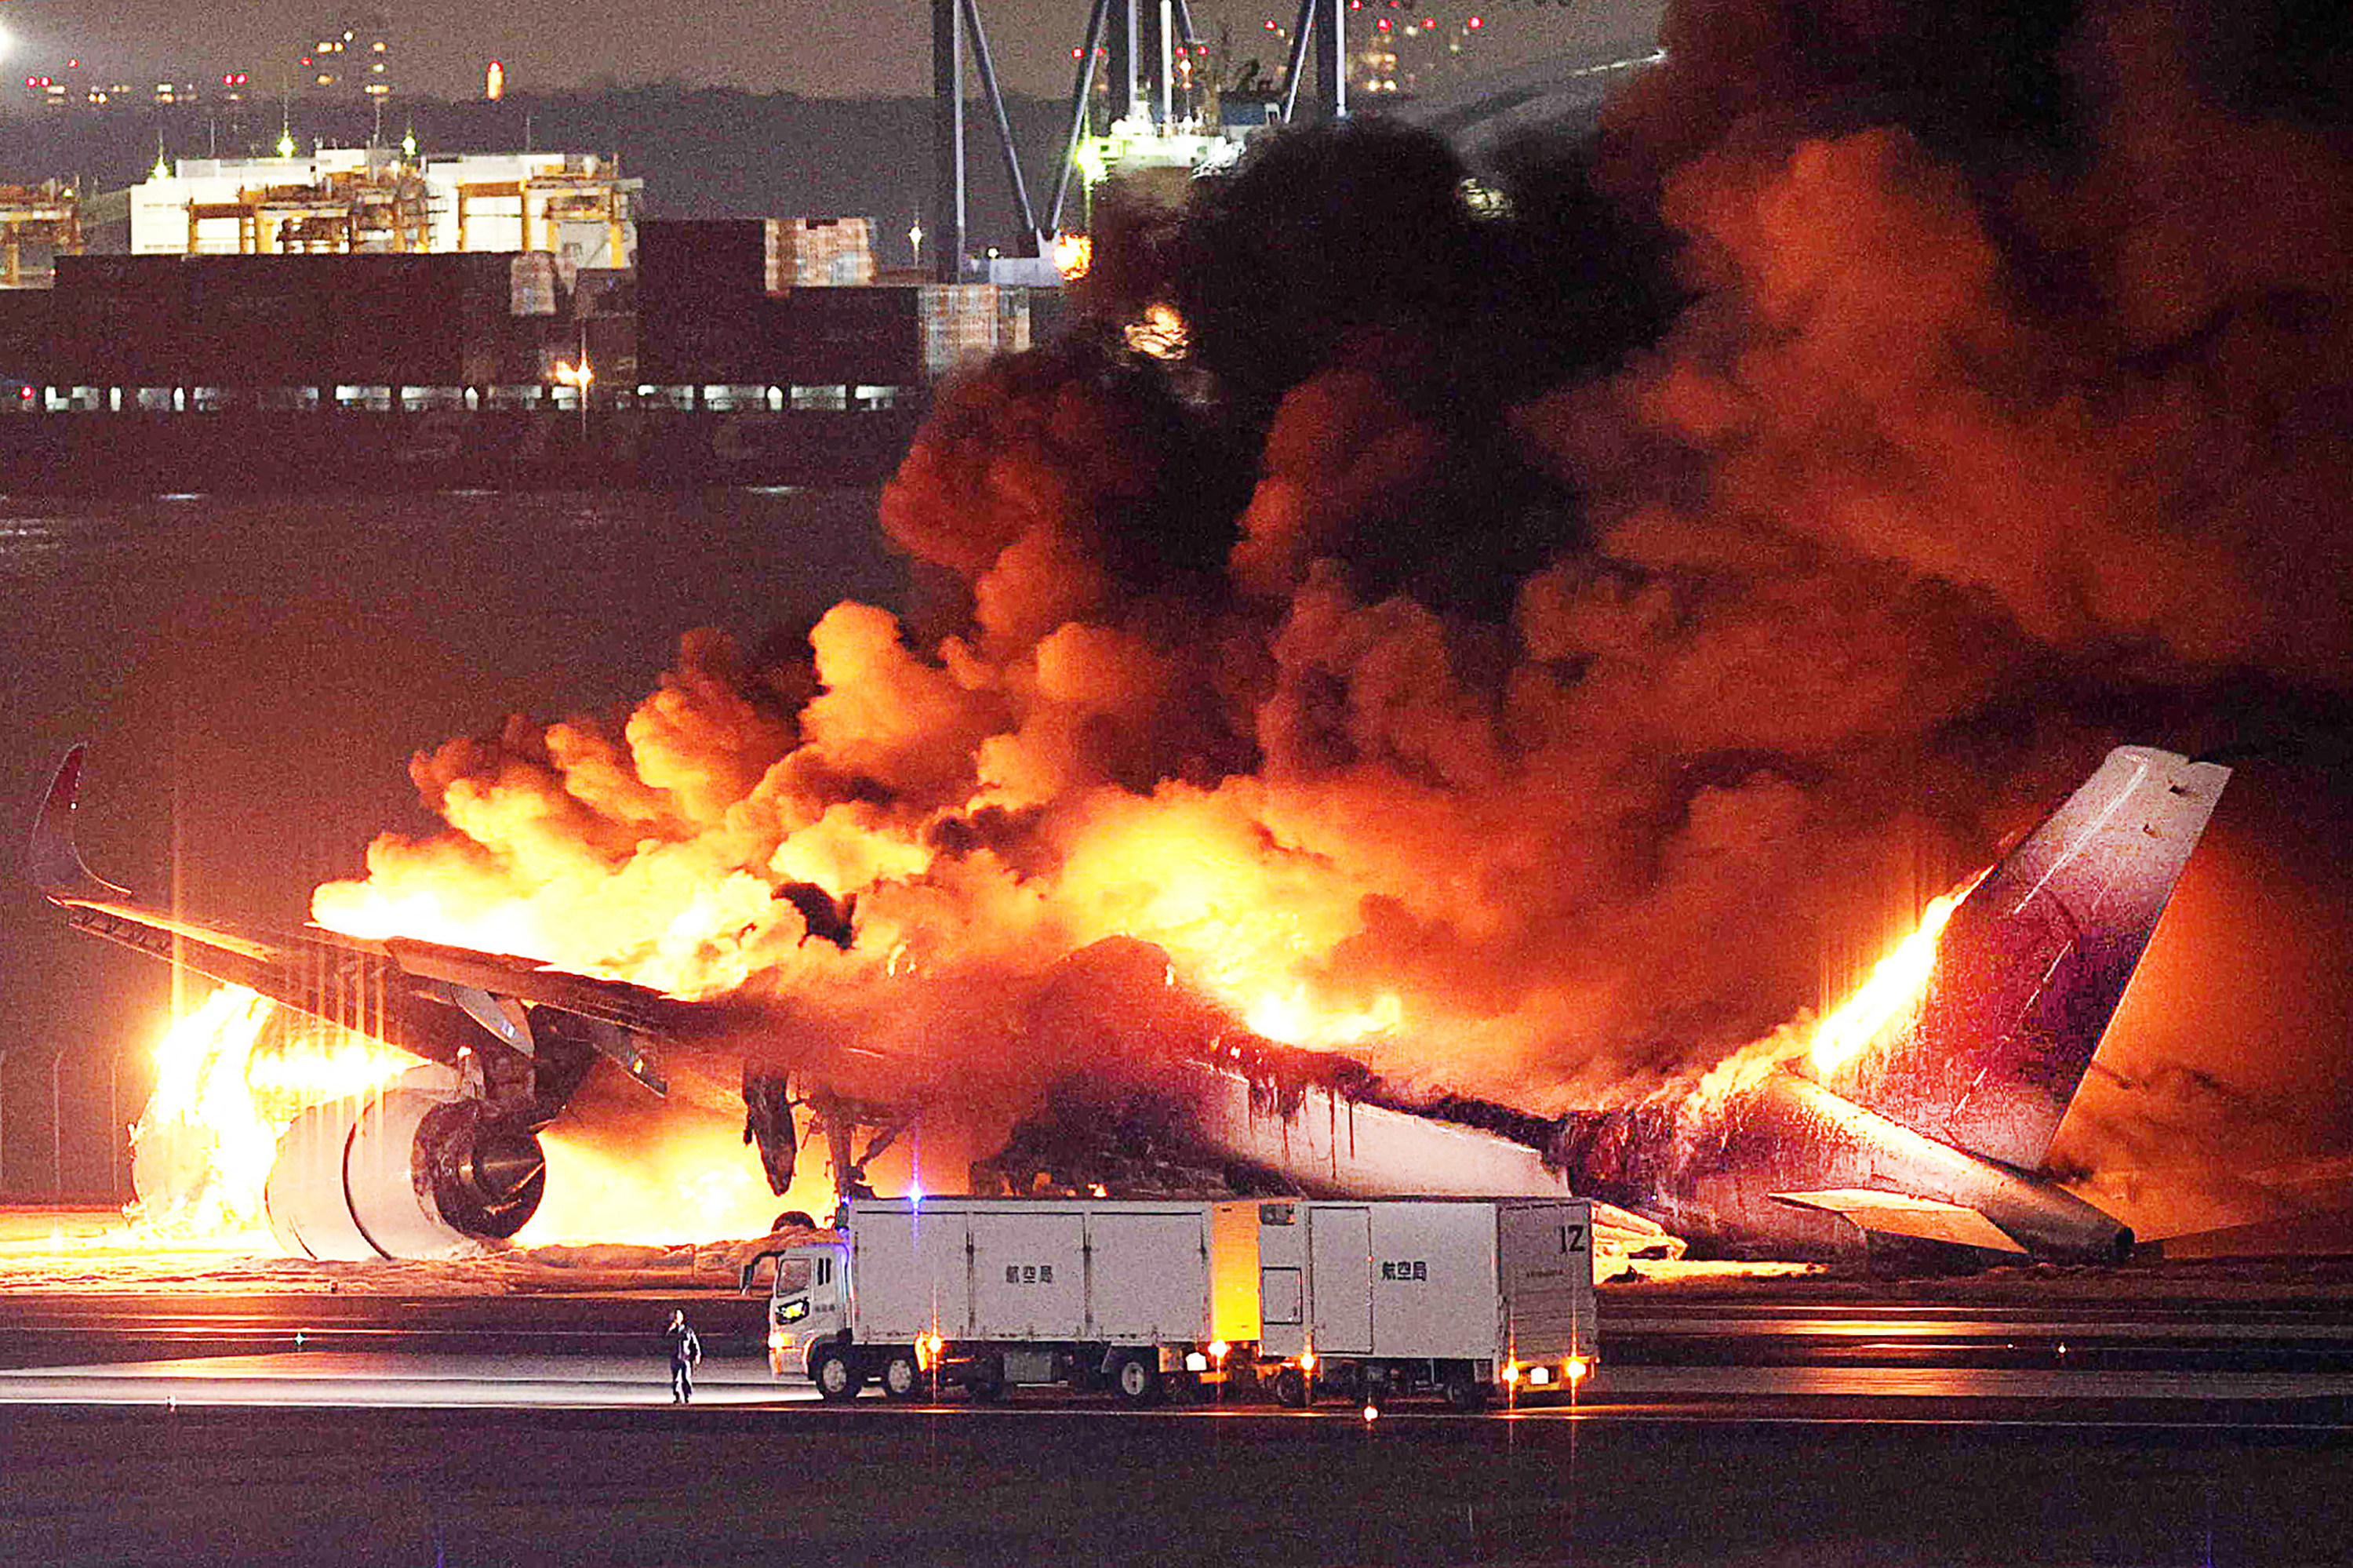 Fourteen Hongkongers aboard an ill-fated Japan Airlines flight have called for official help. Photo: Jiji Press/AFP/Getty Images/TNS